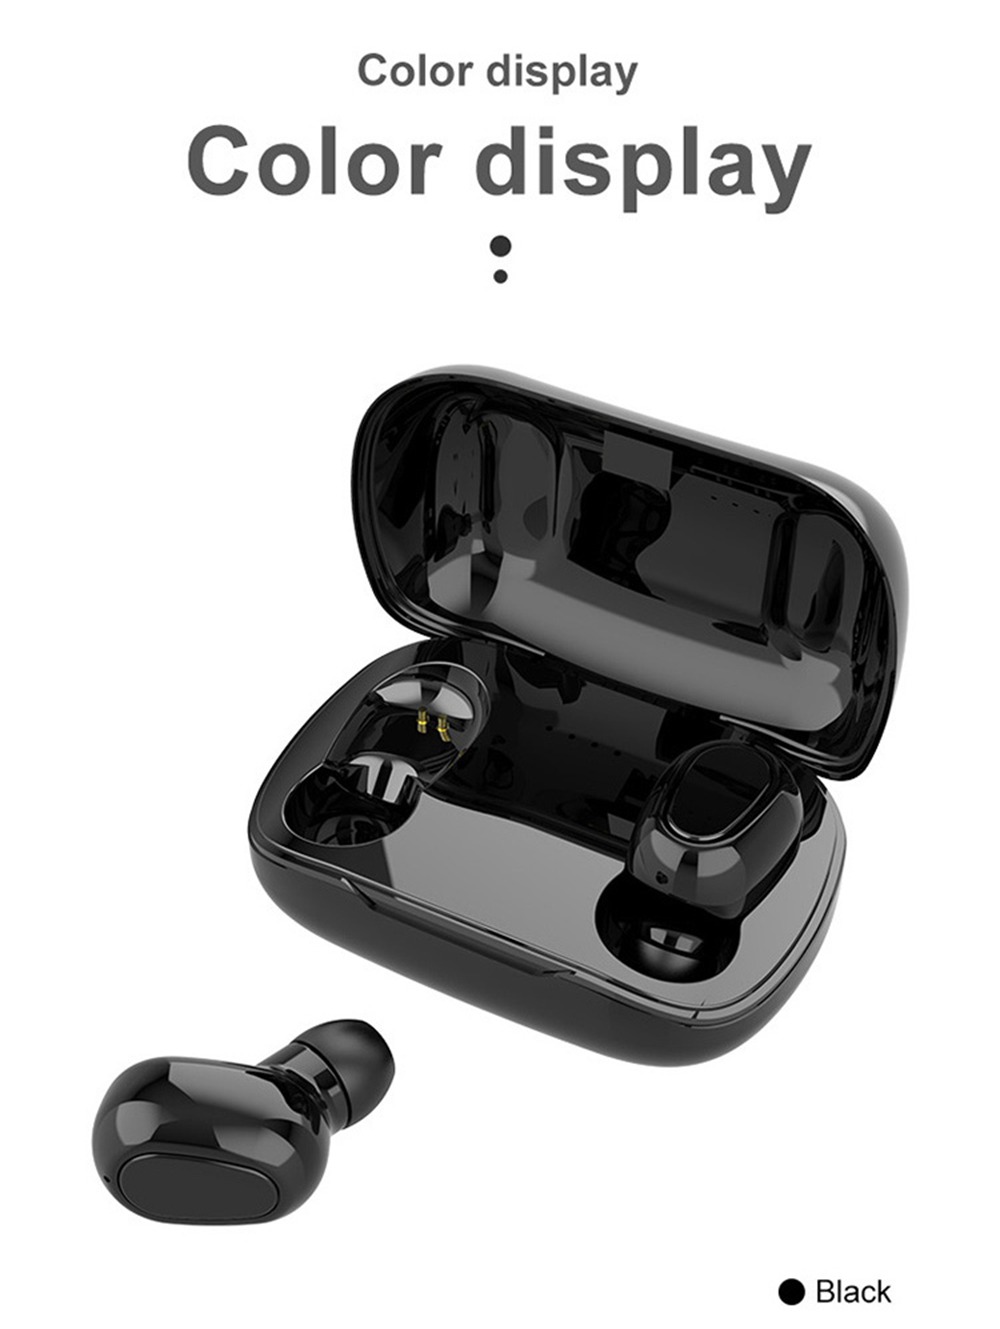 L21 Bluetooth 5.0 TWS Sport Earphones Used Independently 9D Sound Effect Binaural Call 4 Hours Playtime - Black